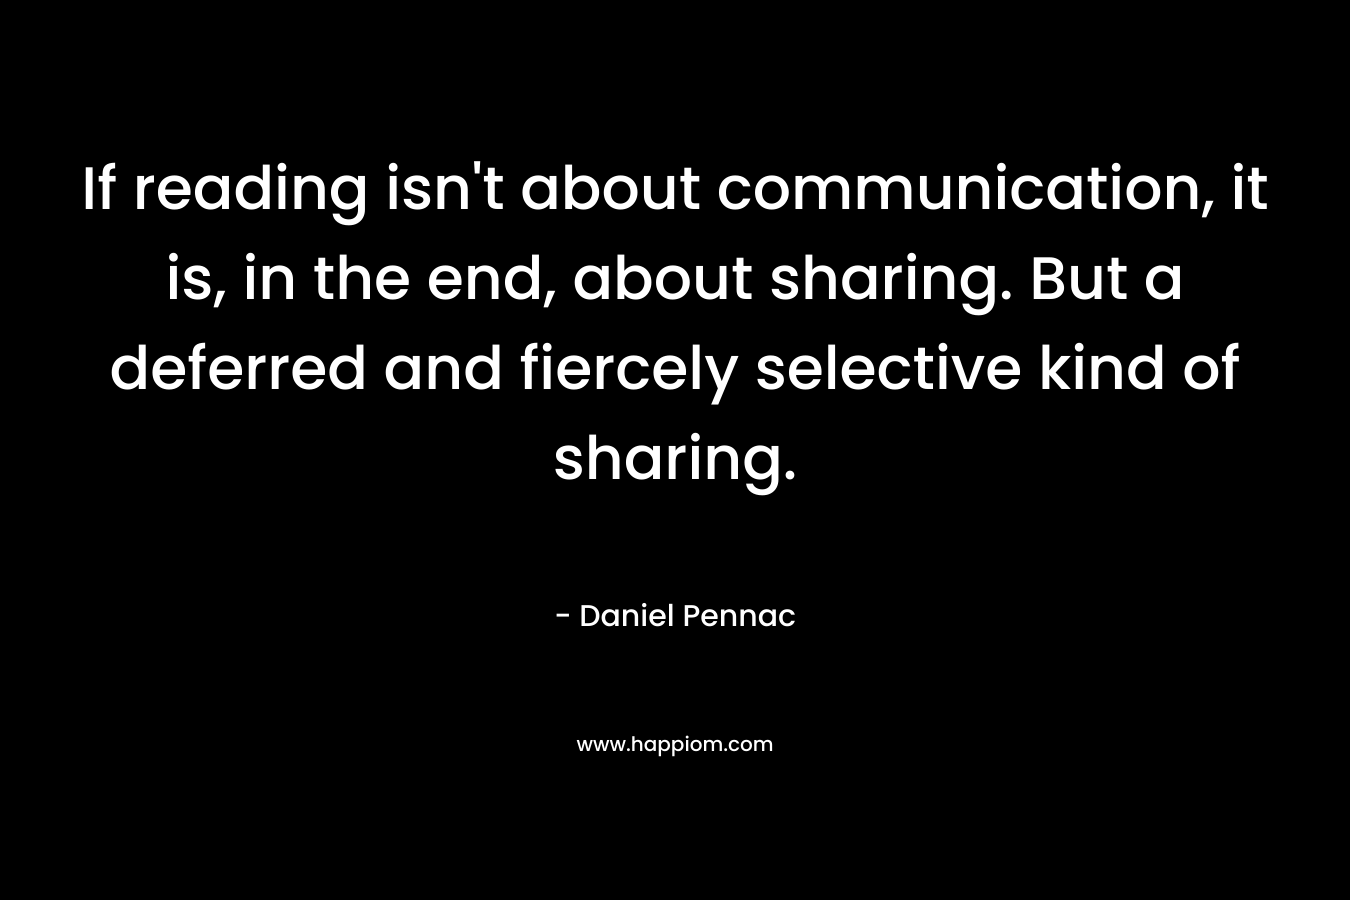 If reading isn't about communication, it is, in the end, about sharing. But a deferred and fiercely selective kind of sharing.